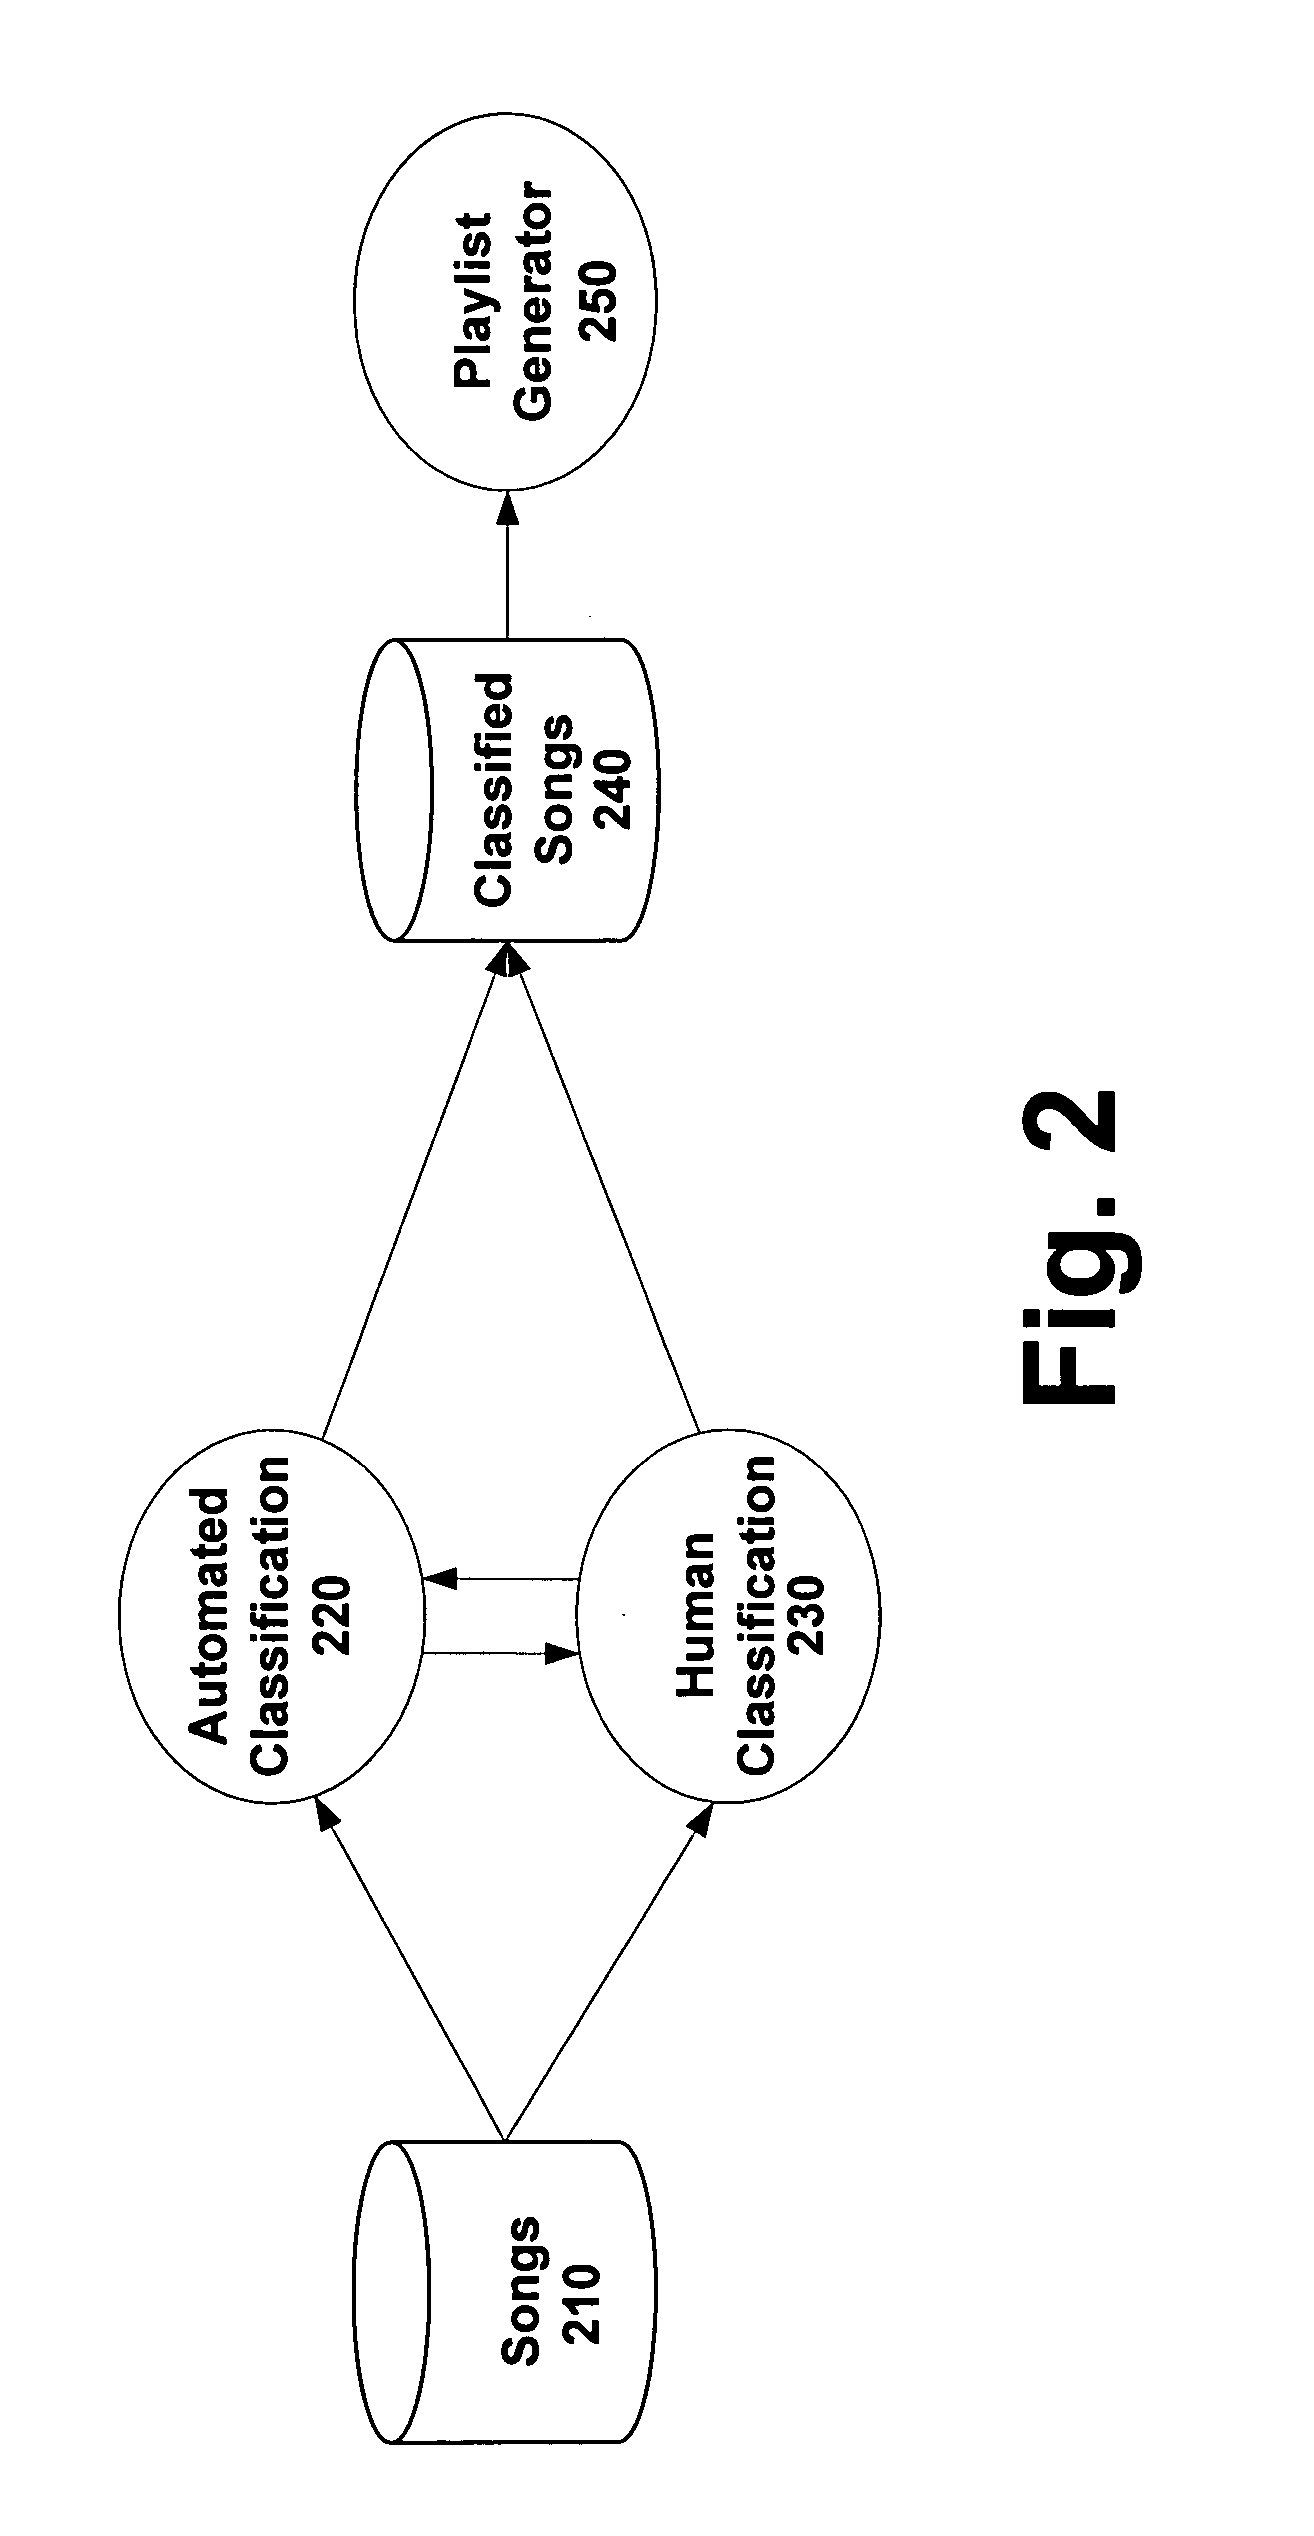 System and methods for providing automatic classification of media entities according to melodic movement properties